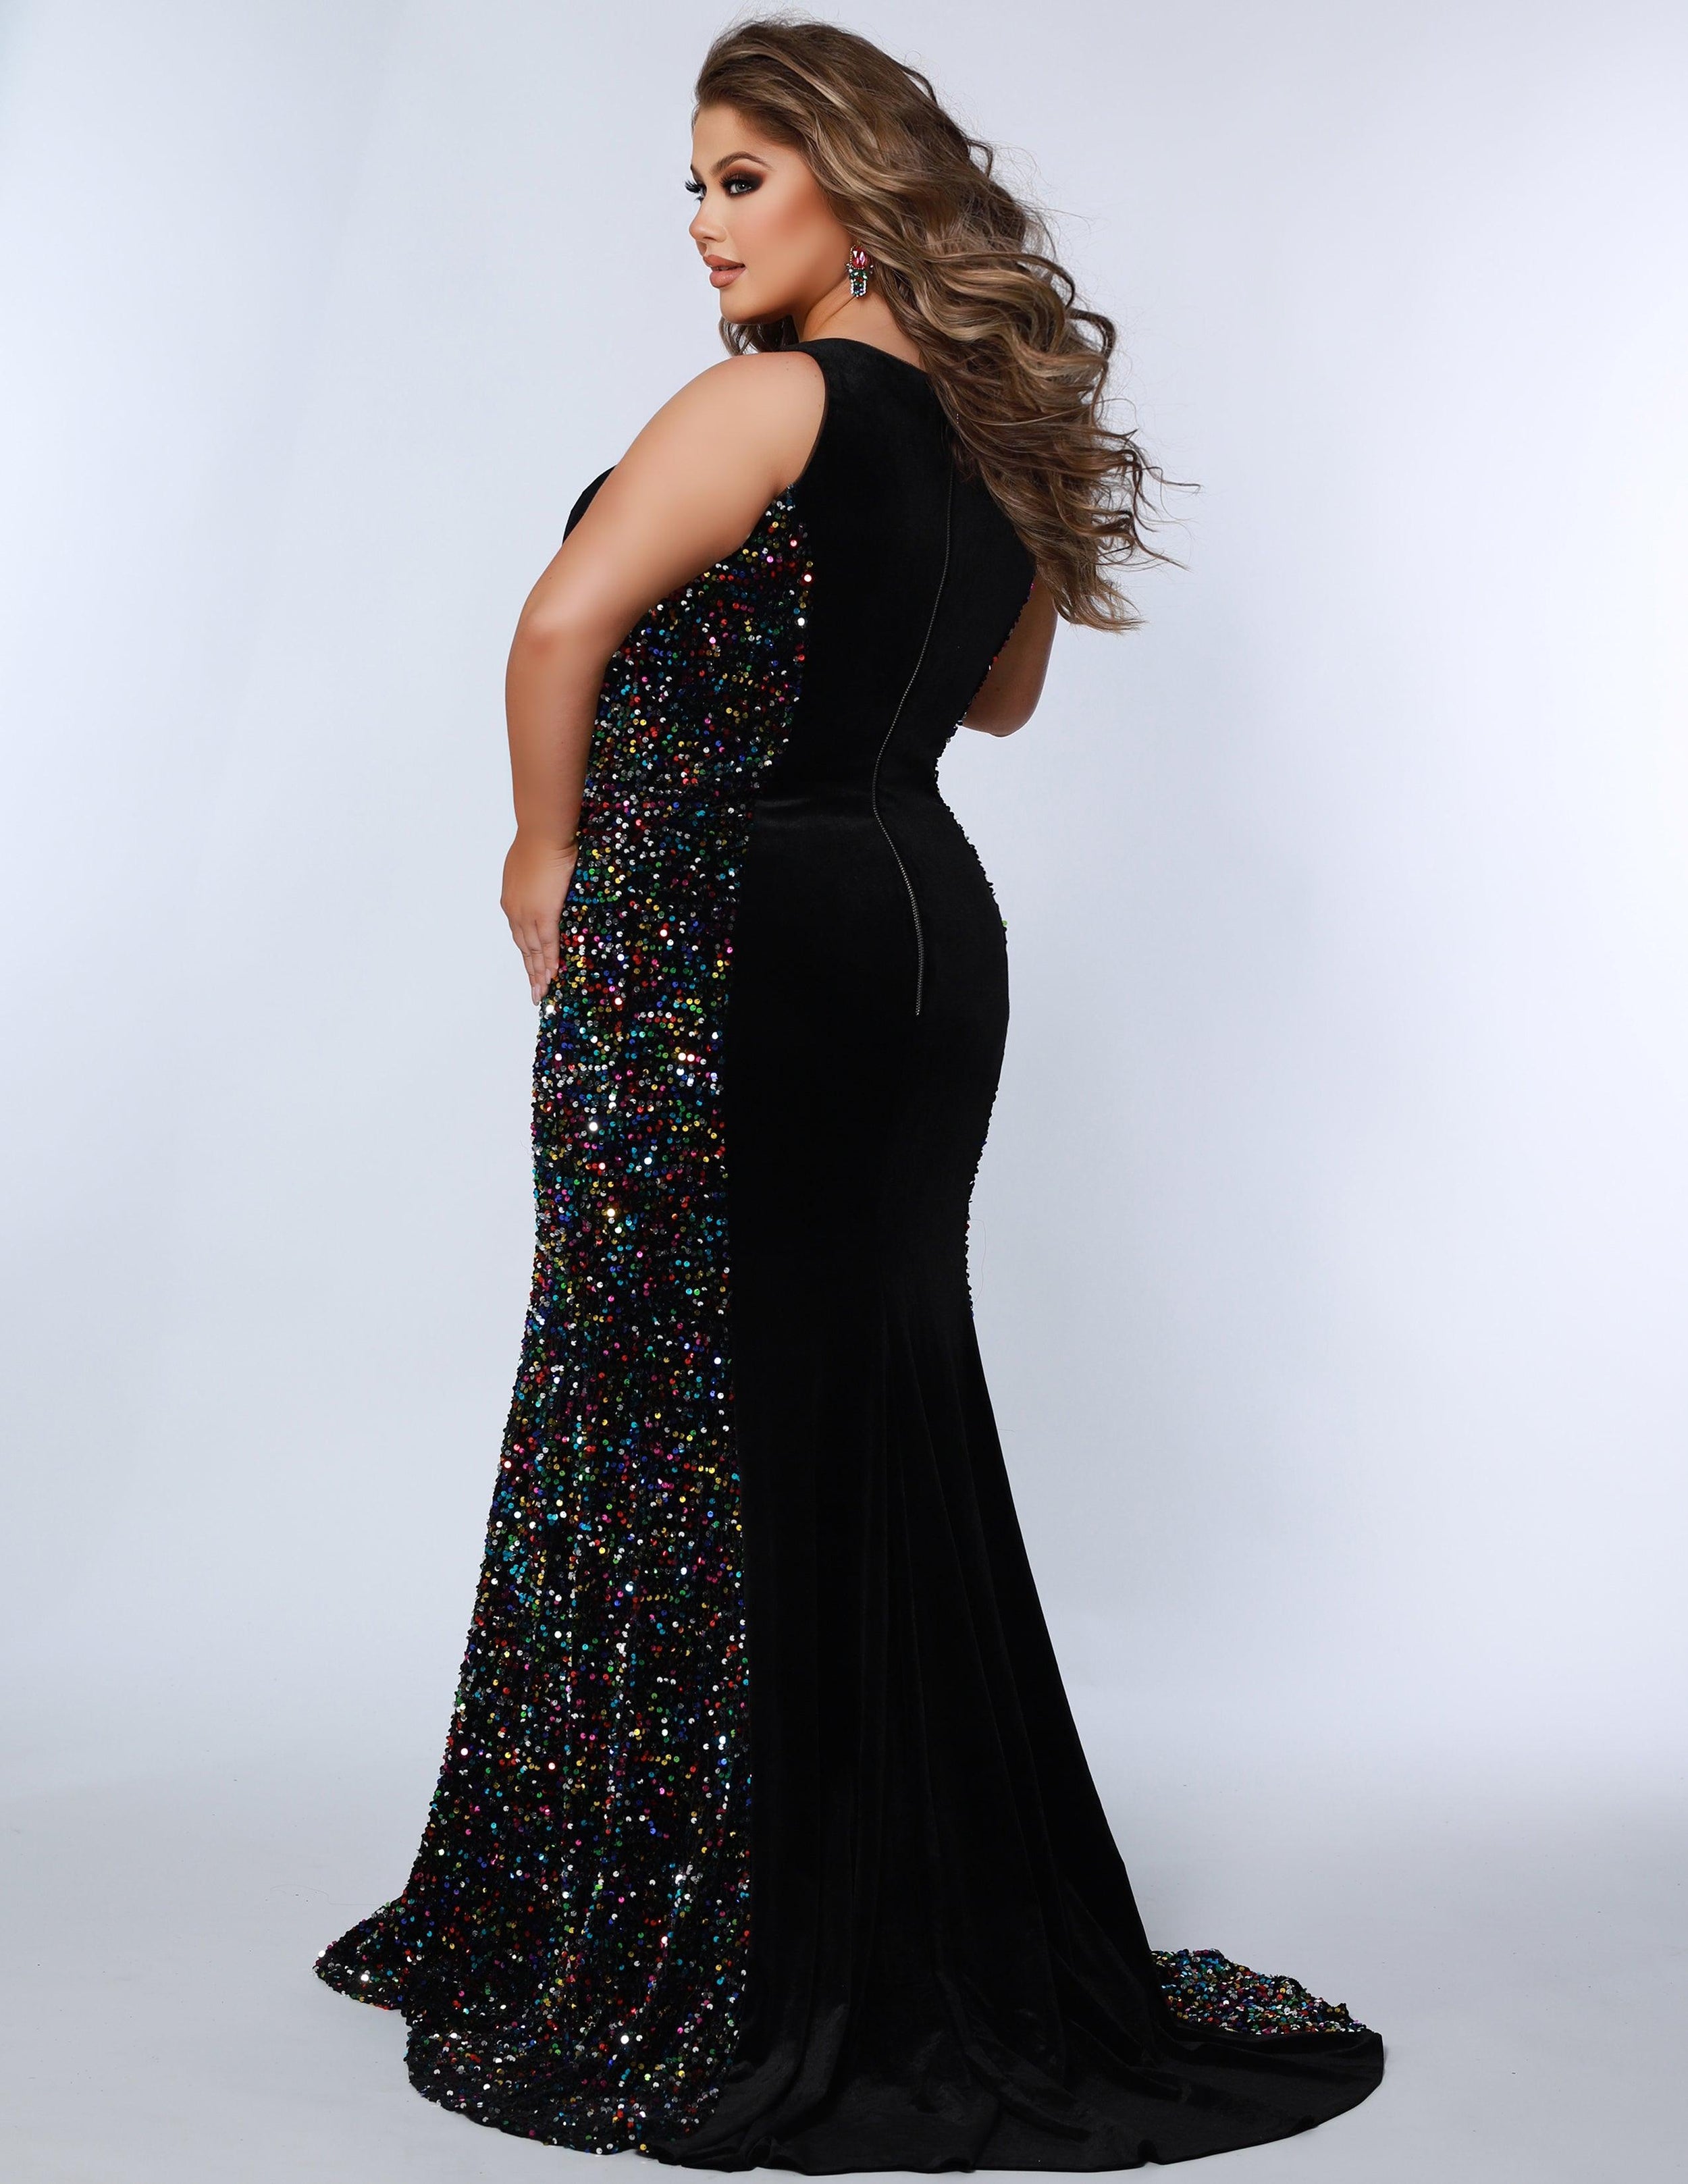 Formal Dresses Long Sleevelesss Plus Size Formal Evening Gown Onyx/Multi